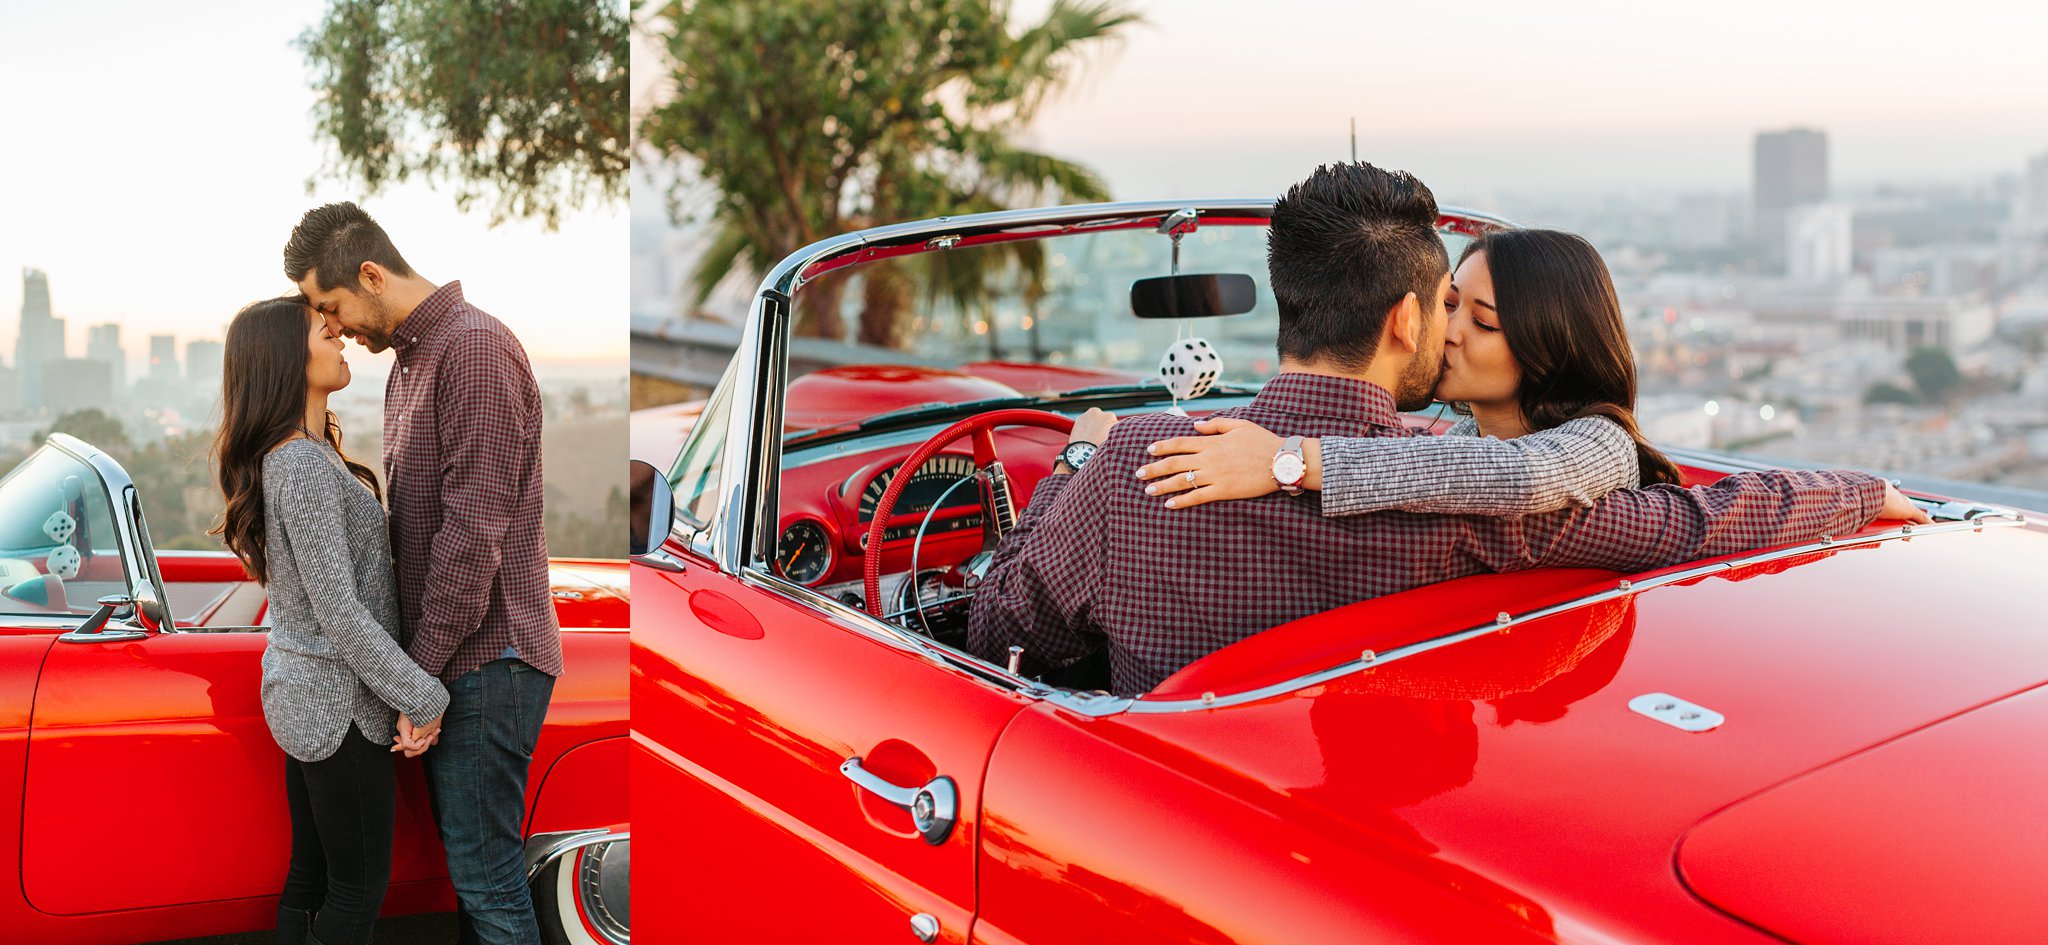 Classic Car Engagement Photos in LA - http://brittneyhannonphotography.com